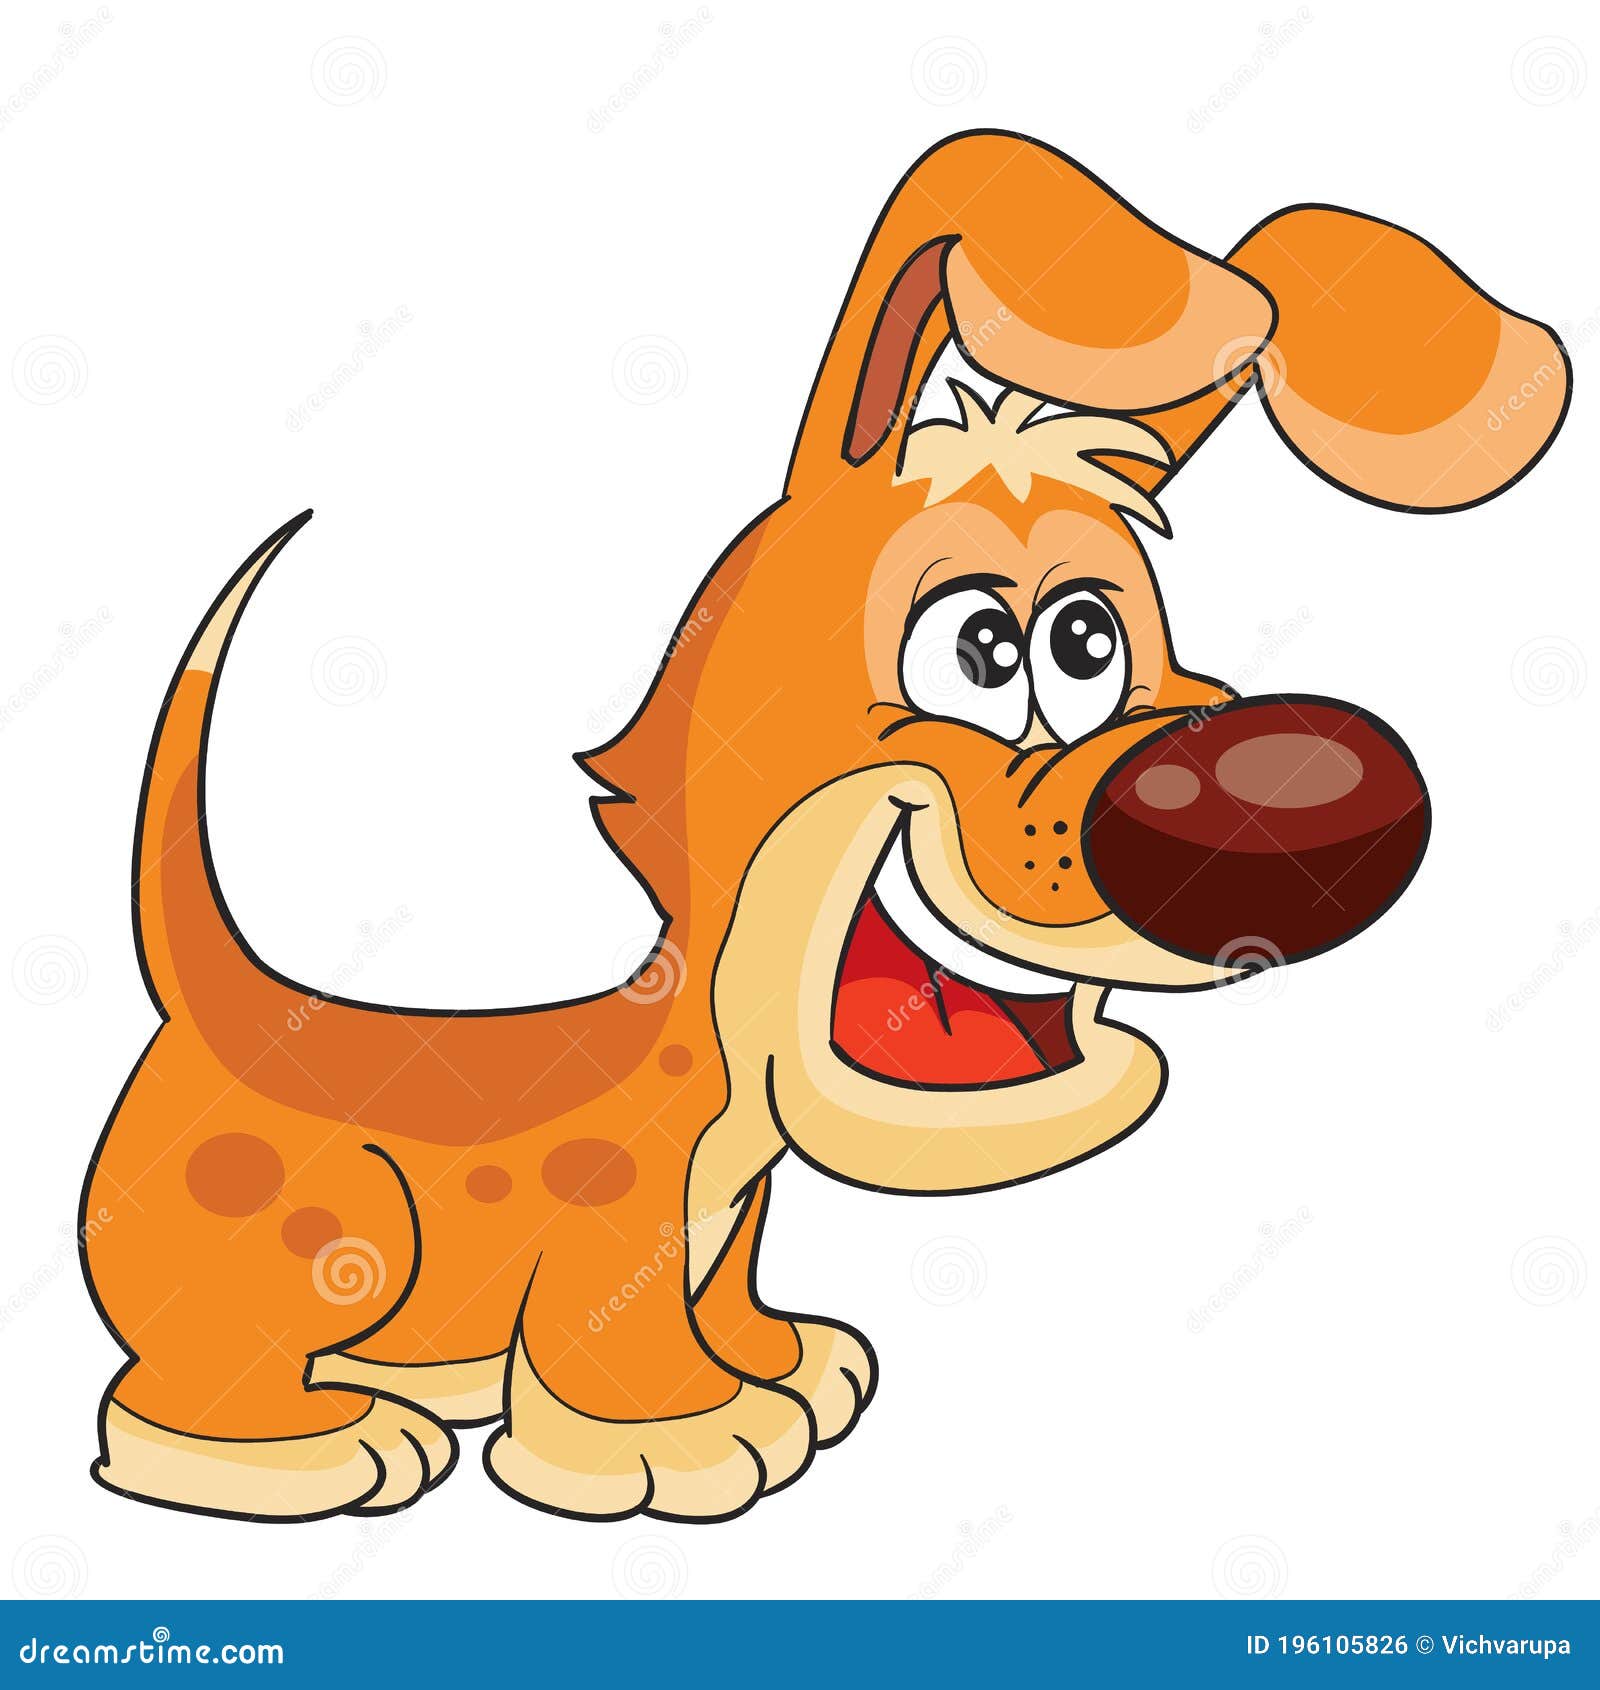 Cute Dog Character With Big Ears In Red Color, Cartoon Illustration ...